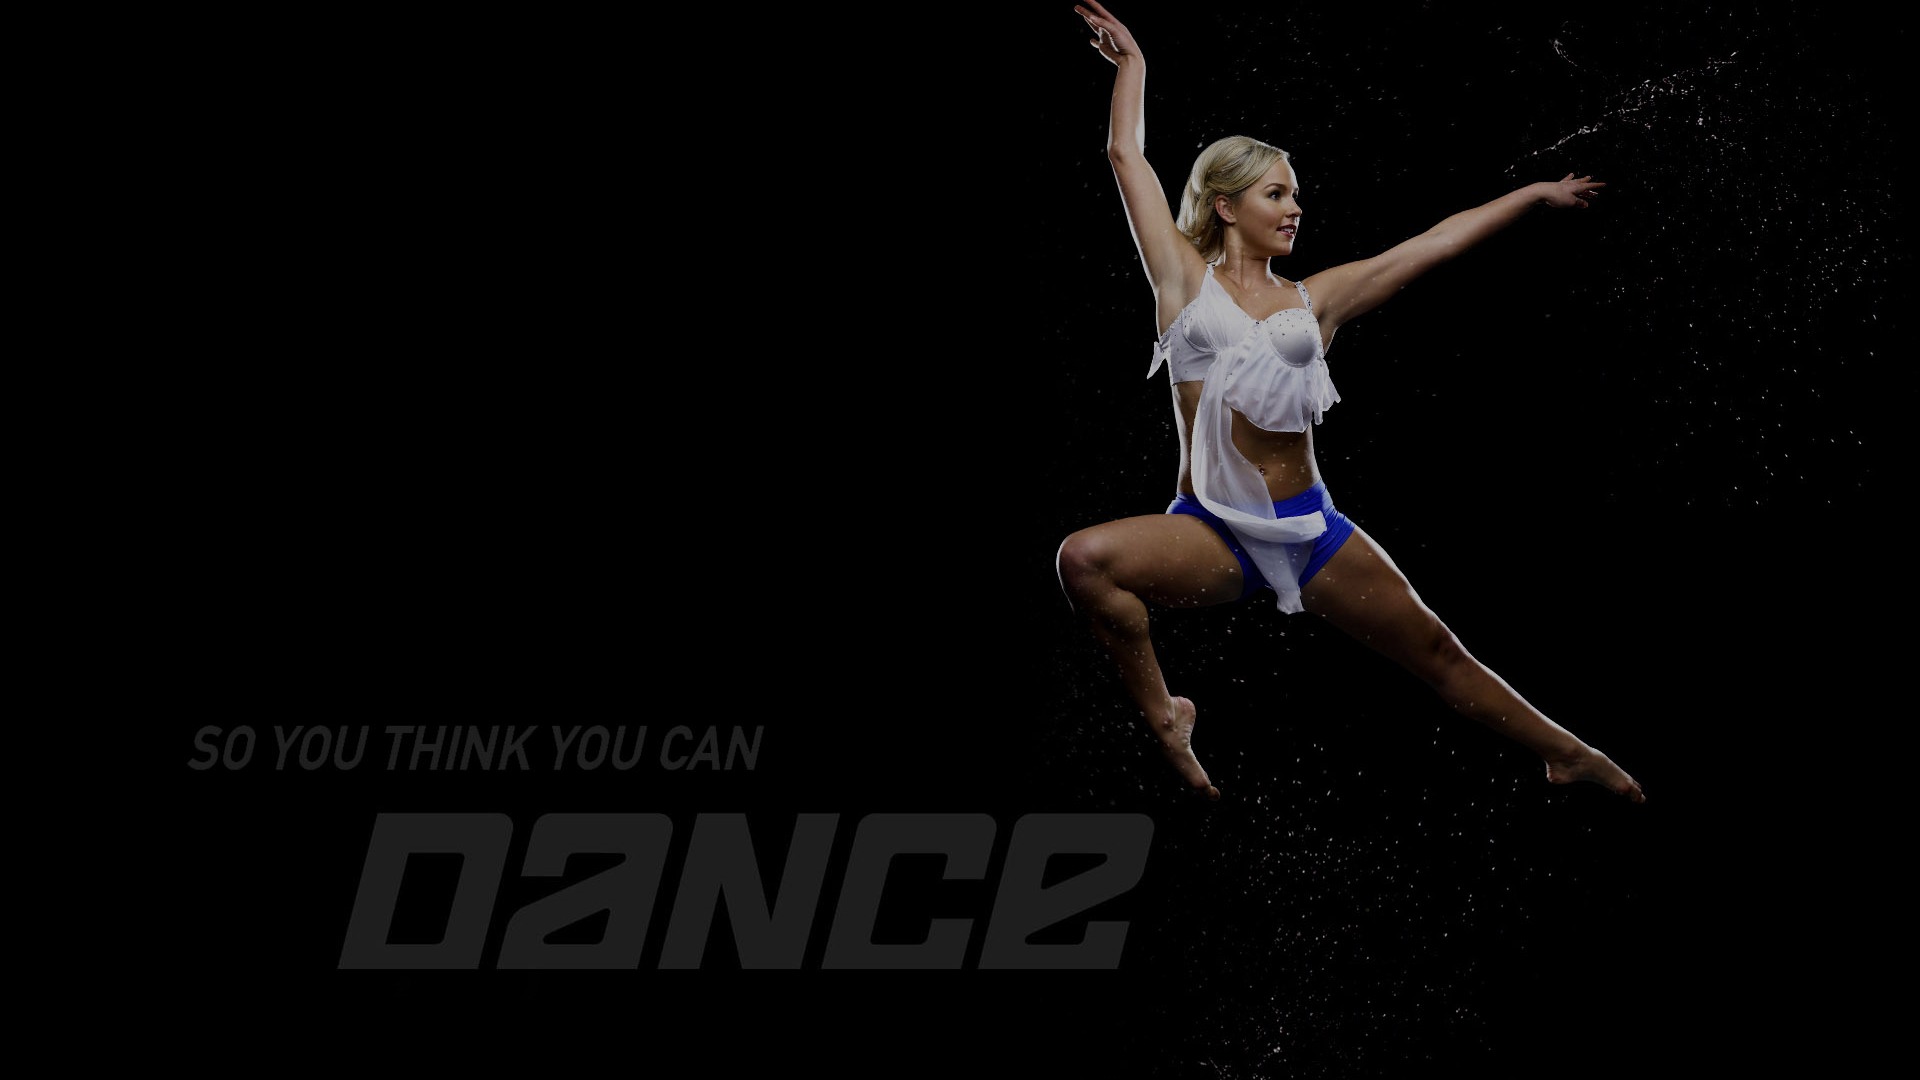 So You Think You Can Dance wallpaper (2) #11 - 1920x1080